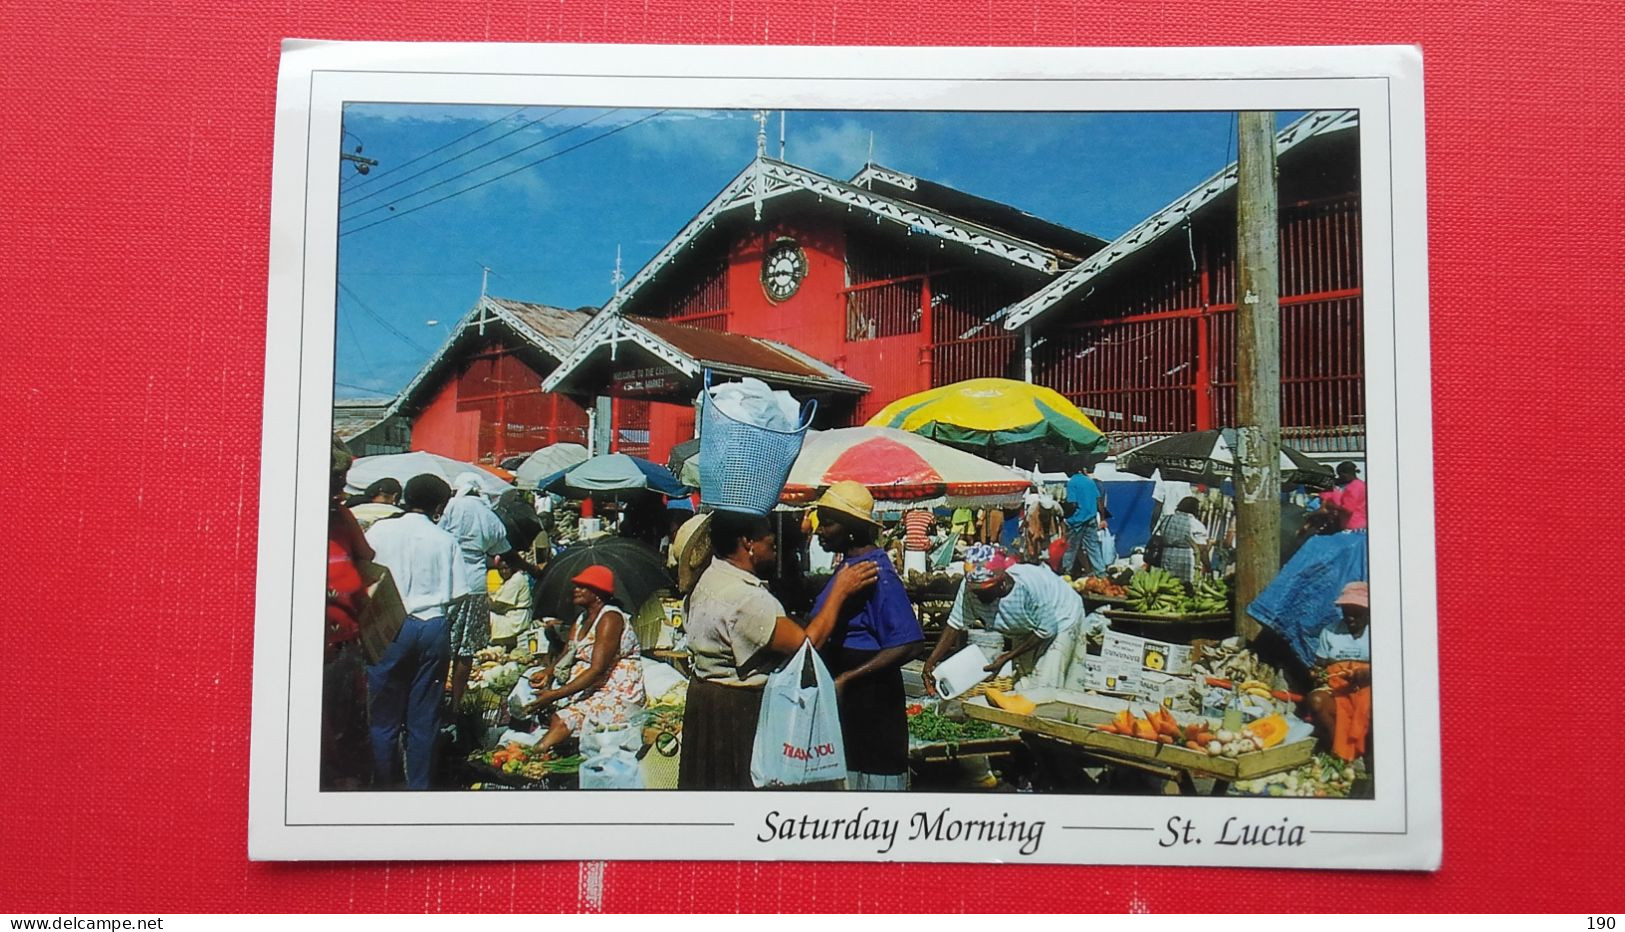 Saturday Morning.Time For A Chat On Market Day - Saint Lucia